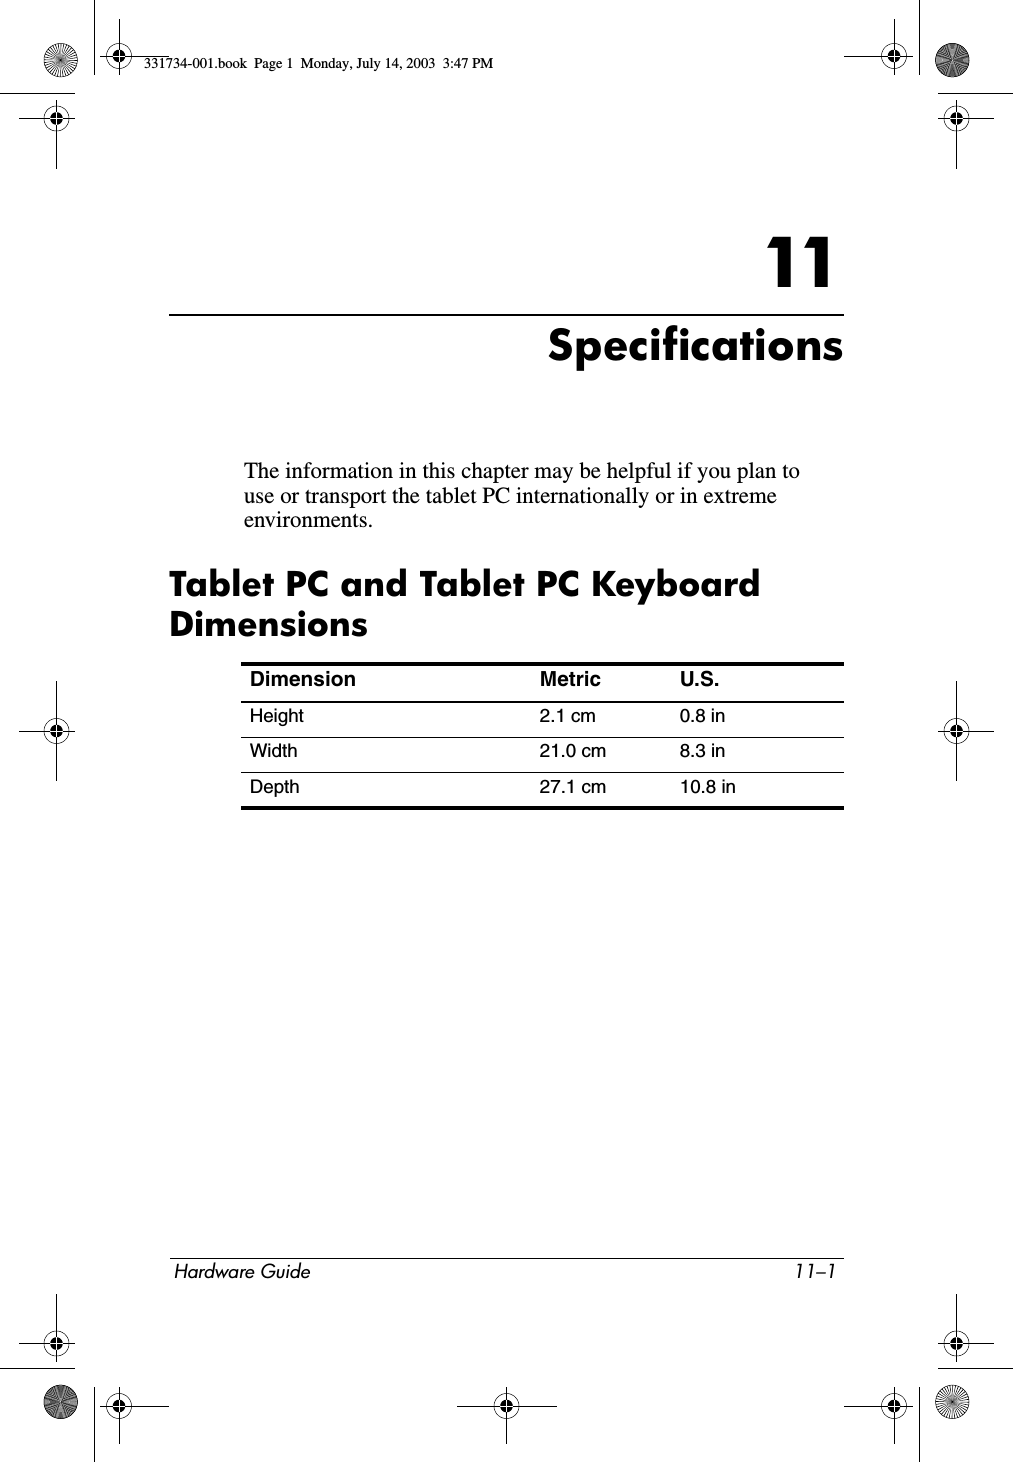 Hardware Guide 11–111SpecificationsThe information in this chapter may be helpful if you plan to use or transport the tablet PC internationally or in extreme environments.Tablet PC and Tablet PC Keyboard DimensionsDimension Metric U.S.Height 2.1 cm 0.8 inWidth 21.0 cm 8.3 inDepth 27.1 cm 10.8 in331734-001.book  Page 1  Monday, July 14, 2003  3:47 PM